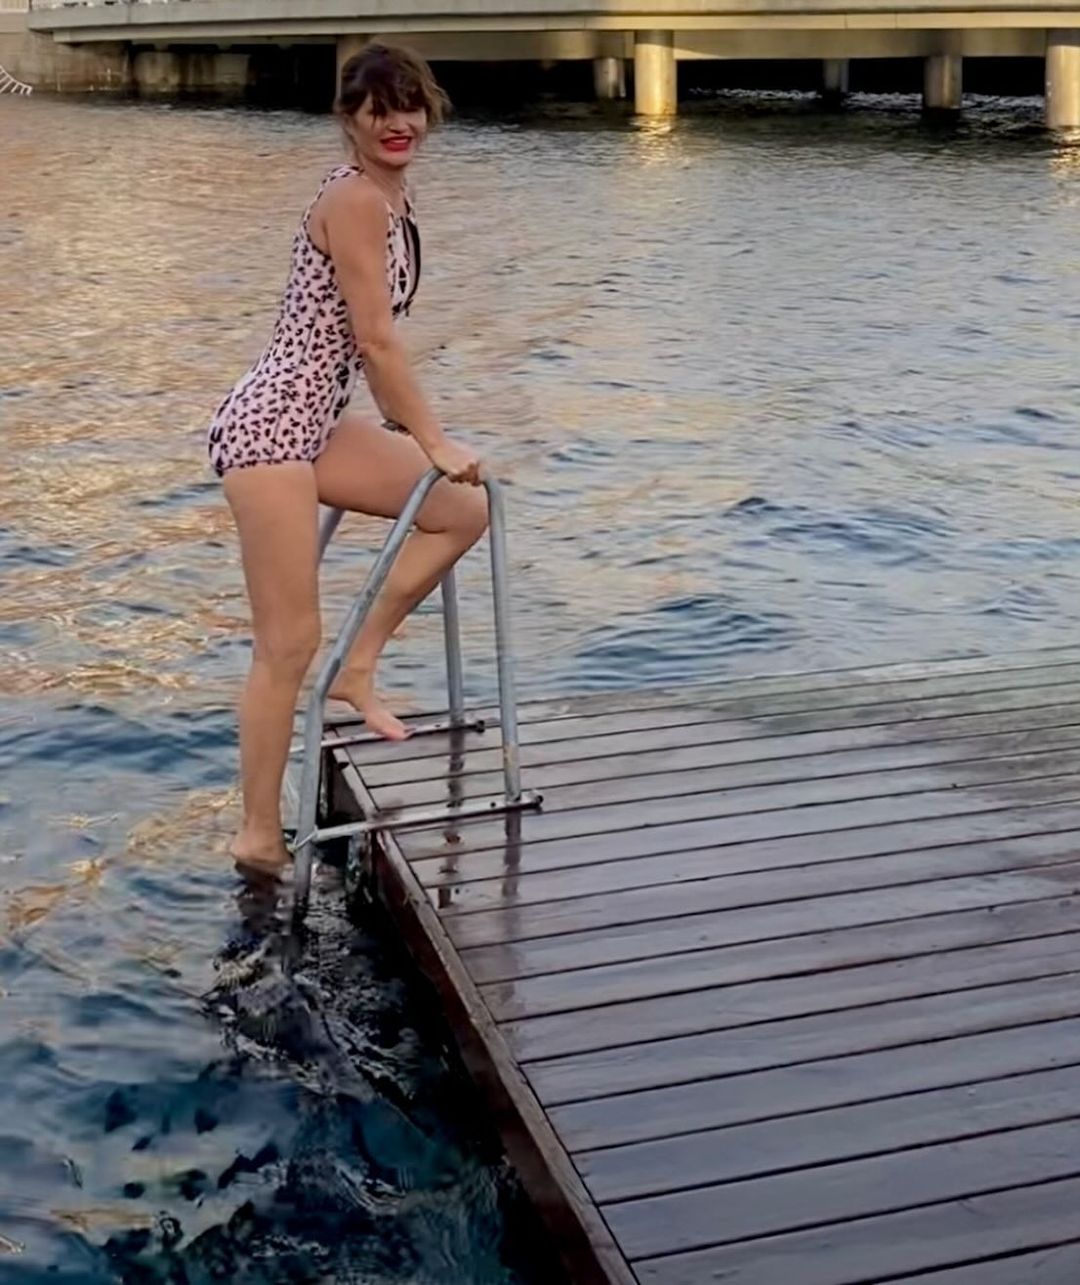 Helena Christensen Keeps Her Cold Plunge Tradition Going!